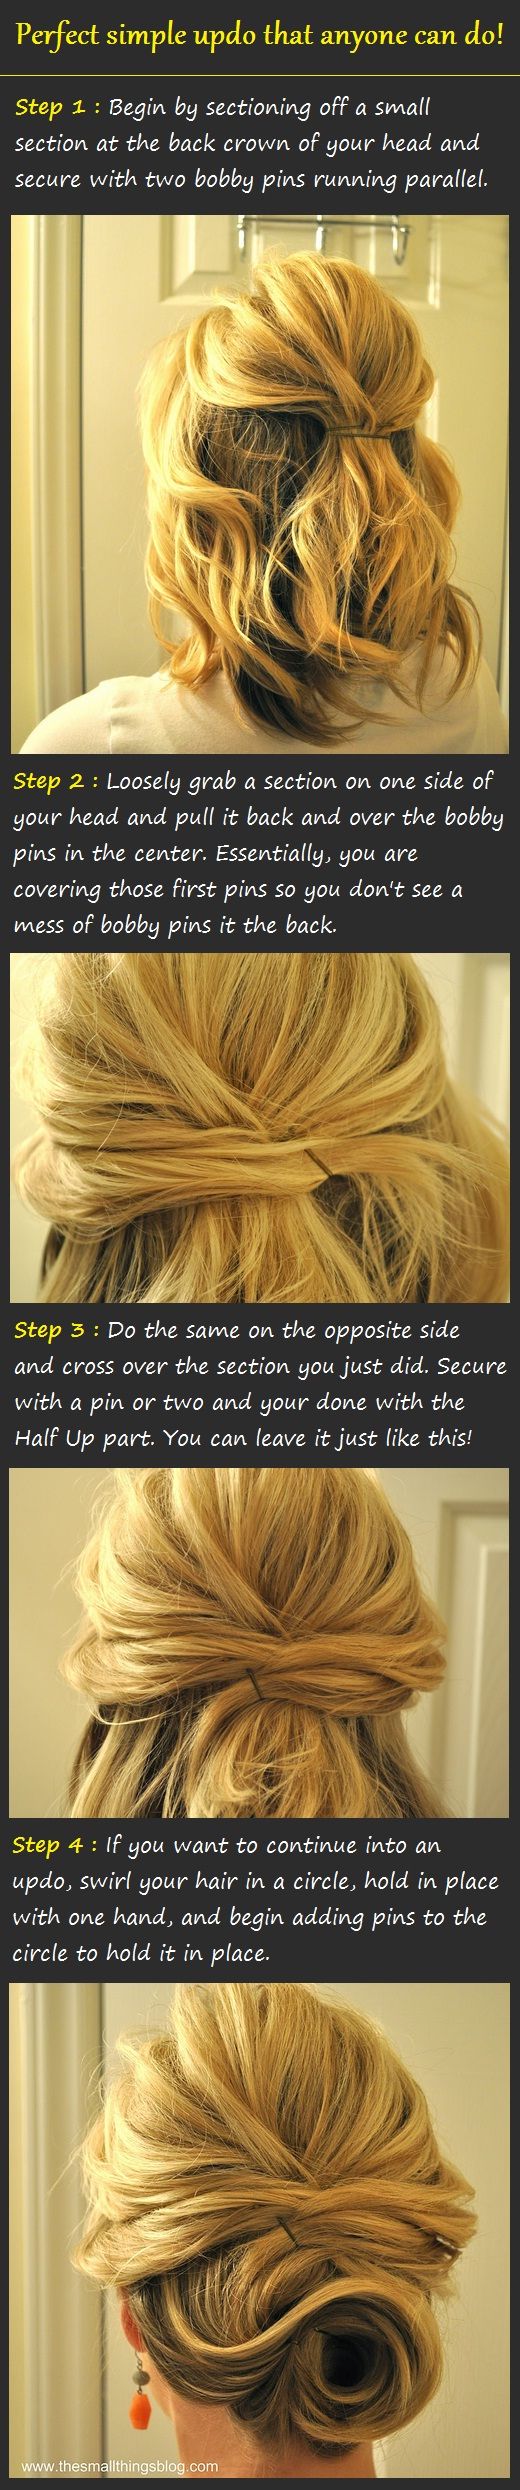 Perfect simple updo. Was a little difficult for me since my hair is long and thi